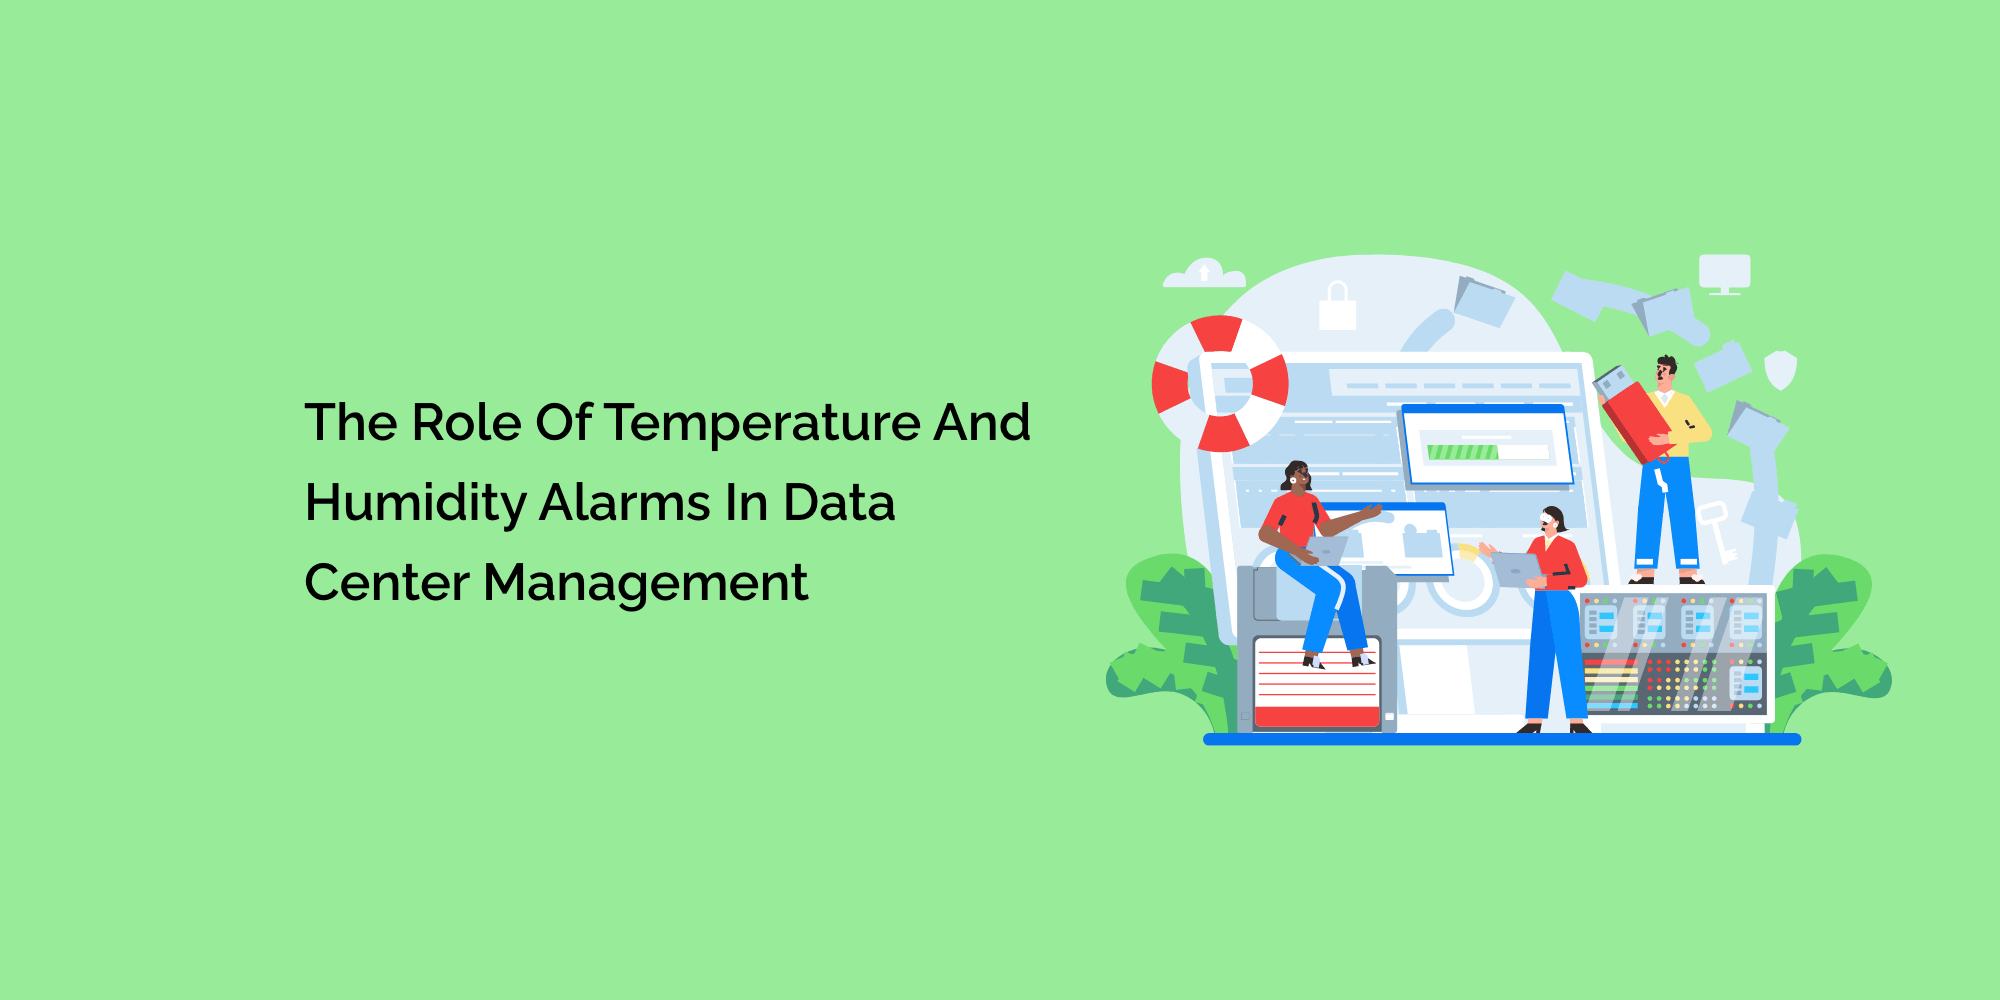 The Role of Temperature and Humidity Alarms in Data Center Management